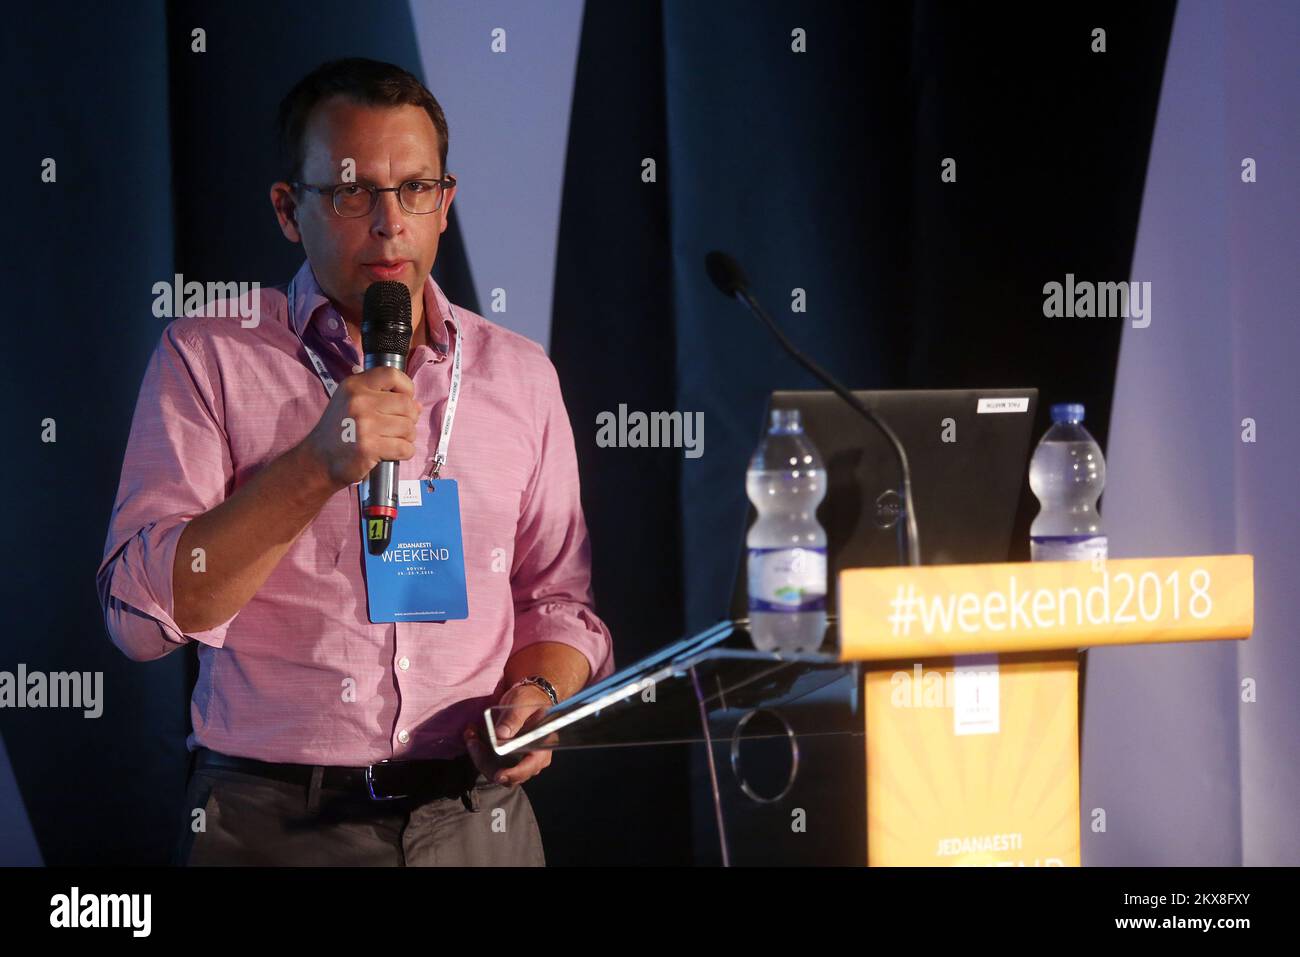 21.09.2018., Rovinj - 11. Weekend Media Festival. Lecture Working with atrificial intelligence in programmatic advertising. Lecturer Paul Martin. Photo: Borna Filic/PIXSELL Stock Photo